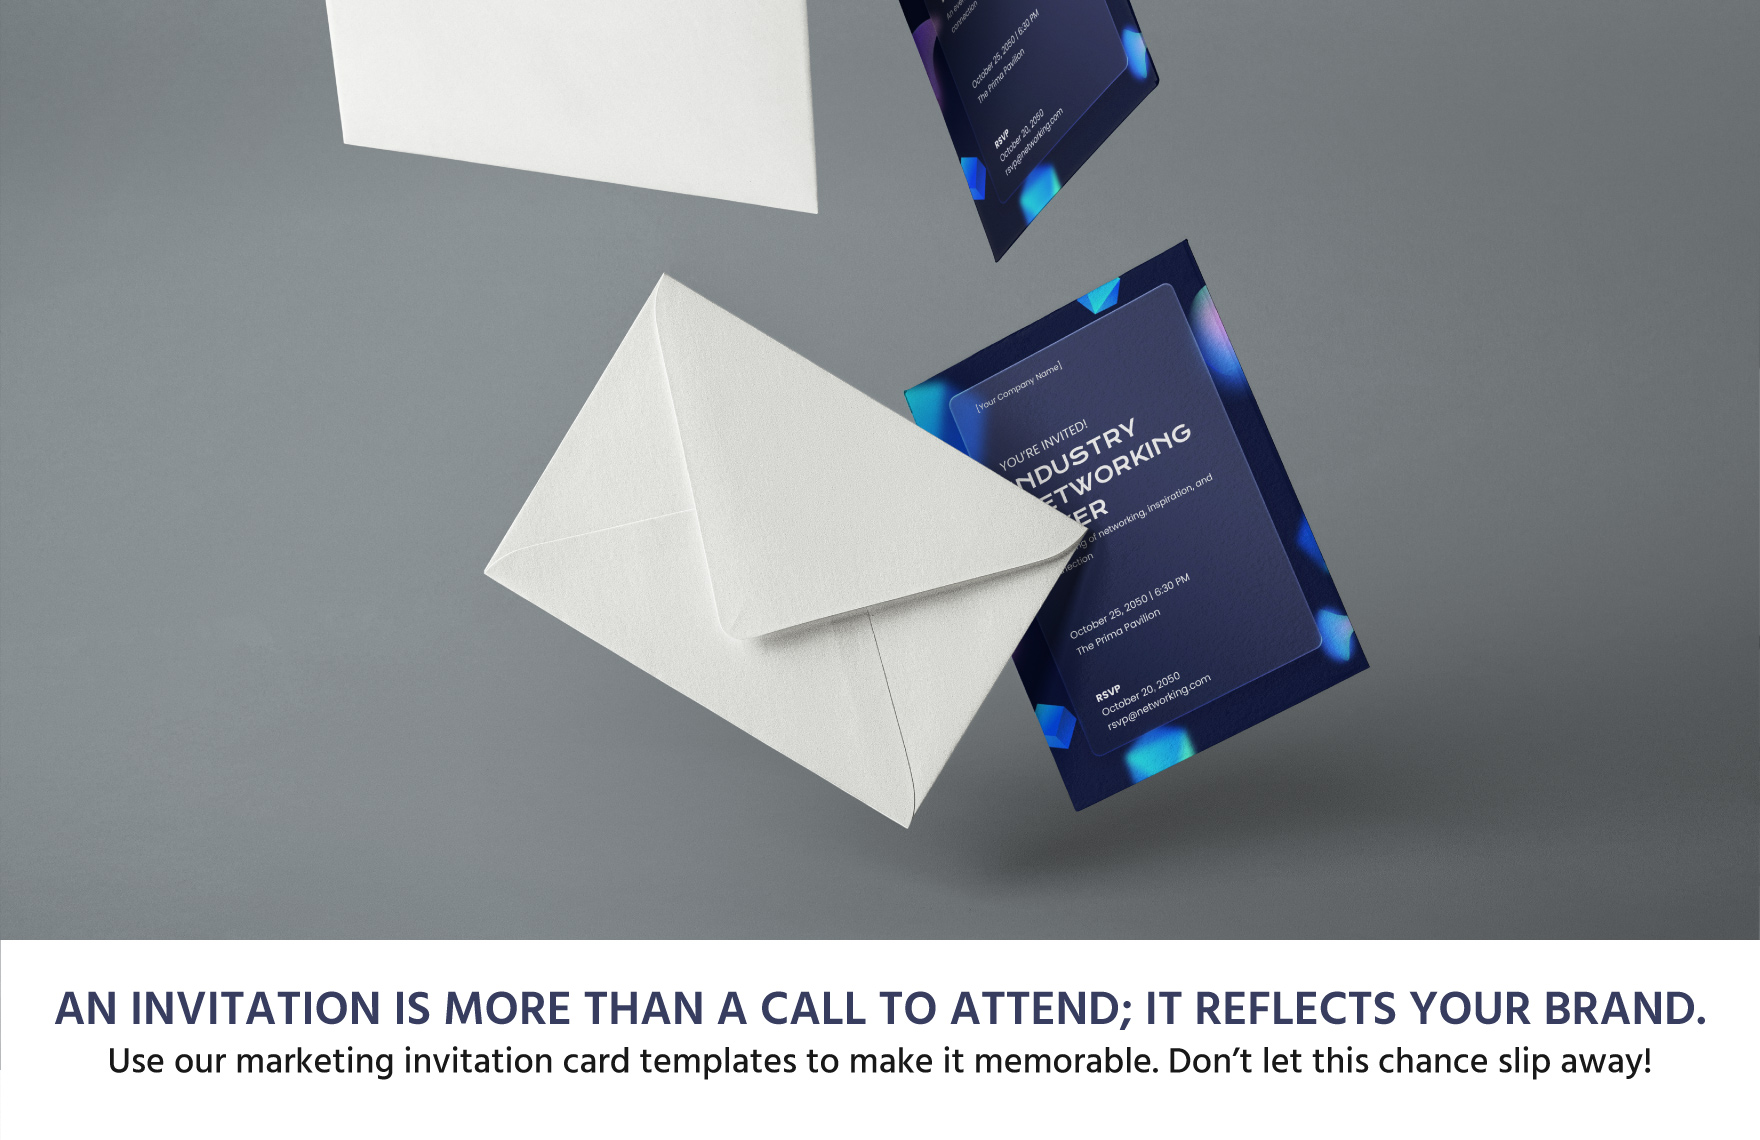 Industry Networking Mixer Invitation Card Template